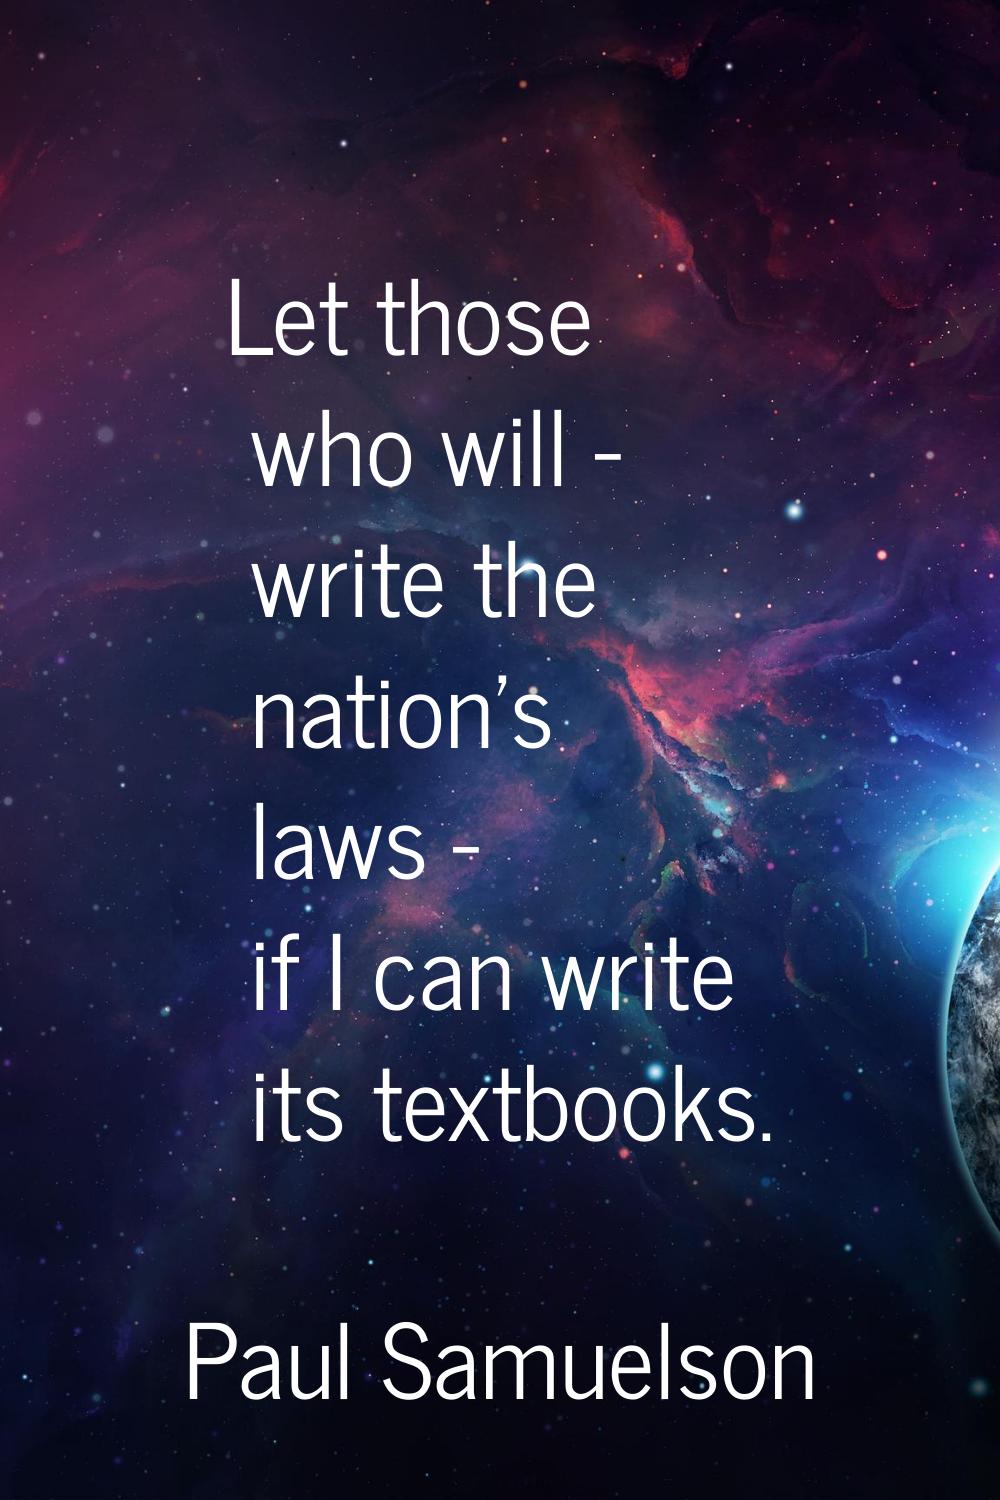 Let those who will - write the nation's laws - if I can write its textbooks.